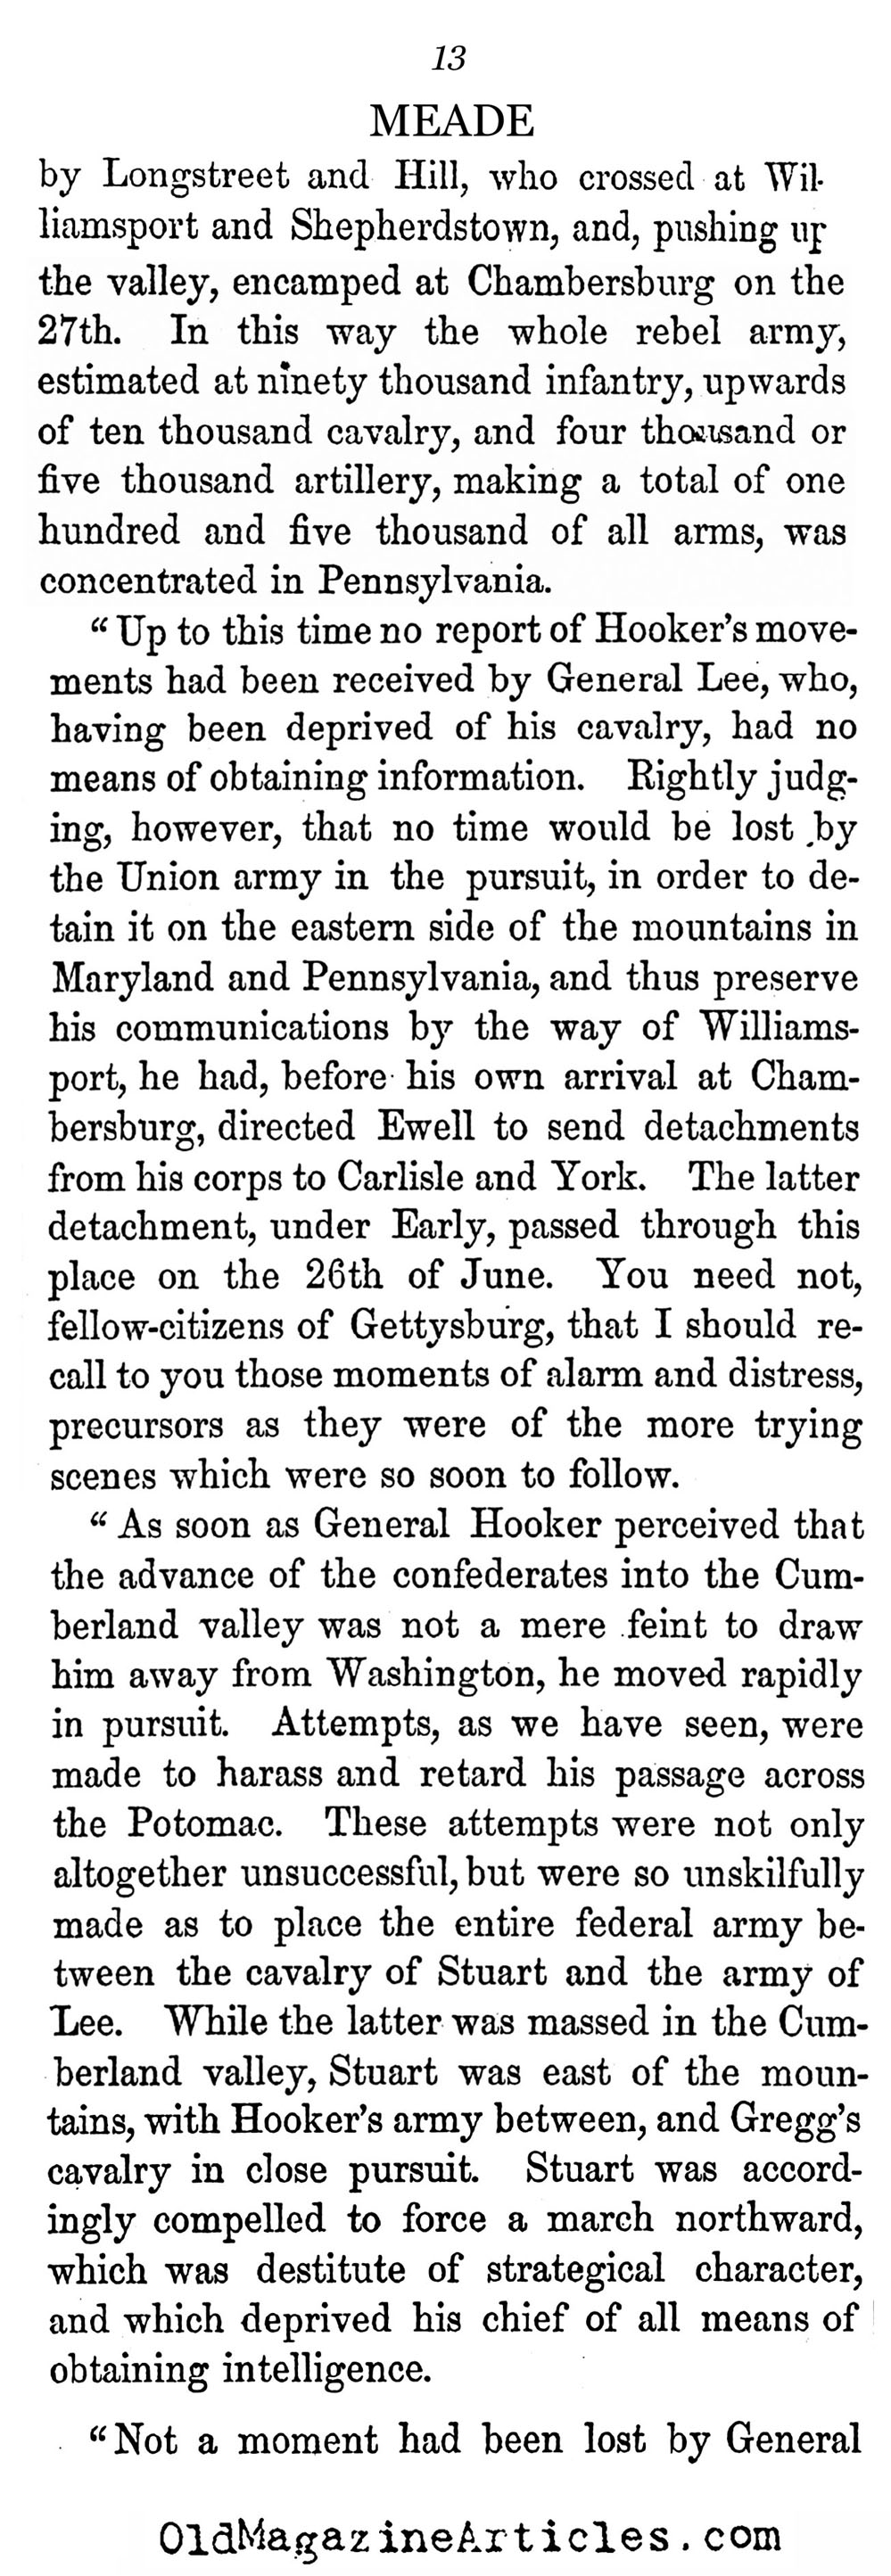 General Meade's Report on the Battle of Gettysburg (History of the U.S. , 1867)